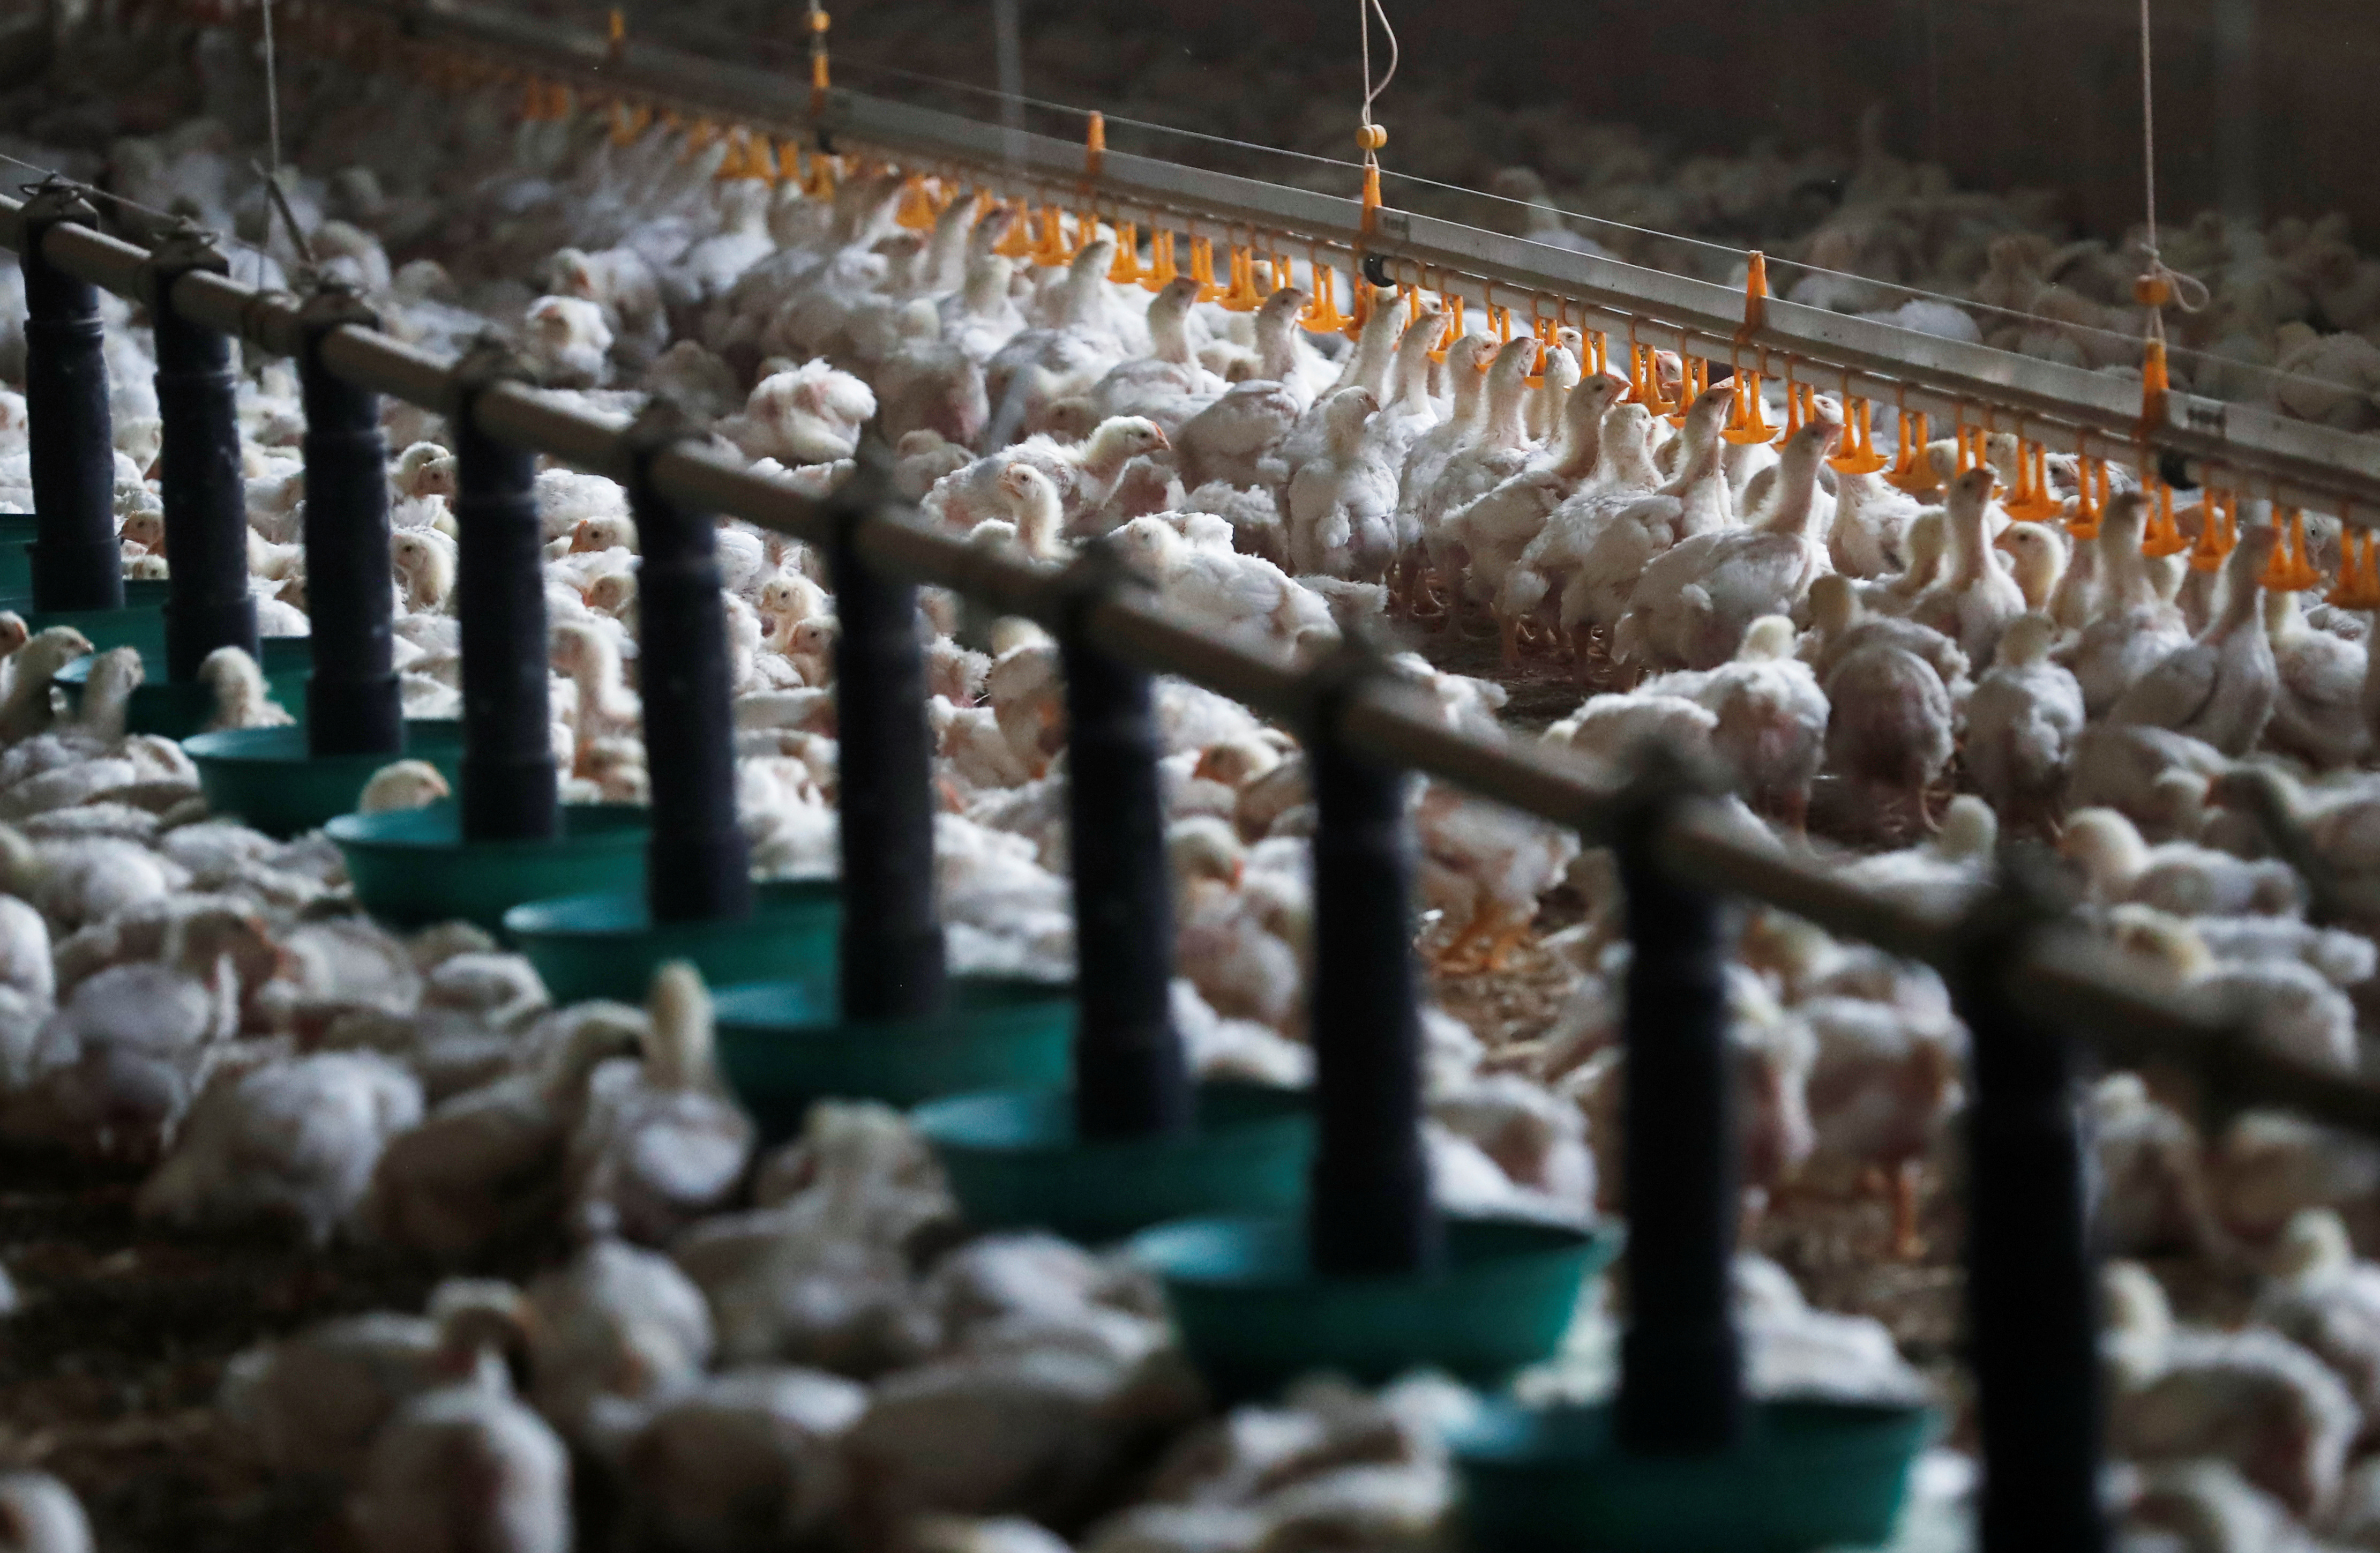 Chickens are seen at a poultry farm in Cherance near Le Mans